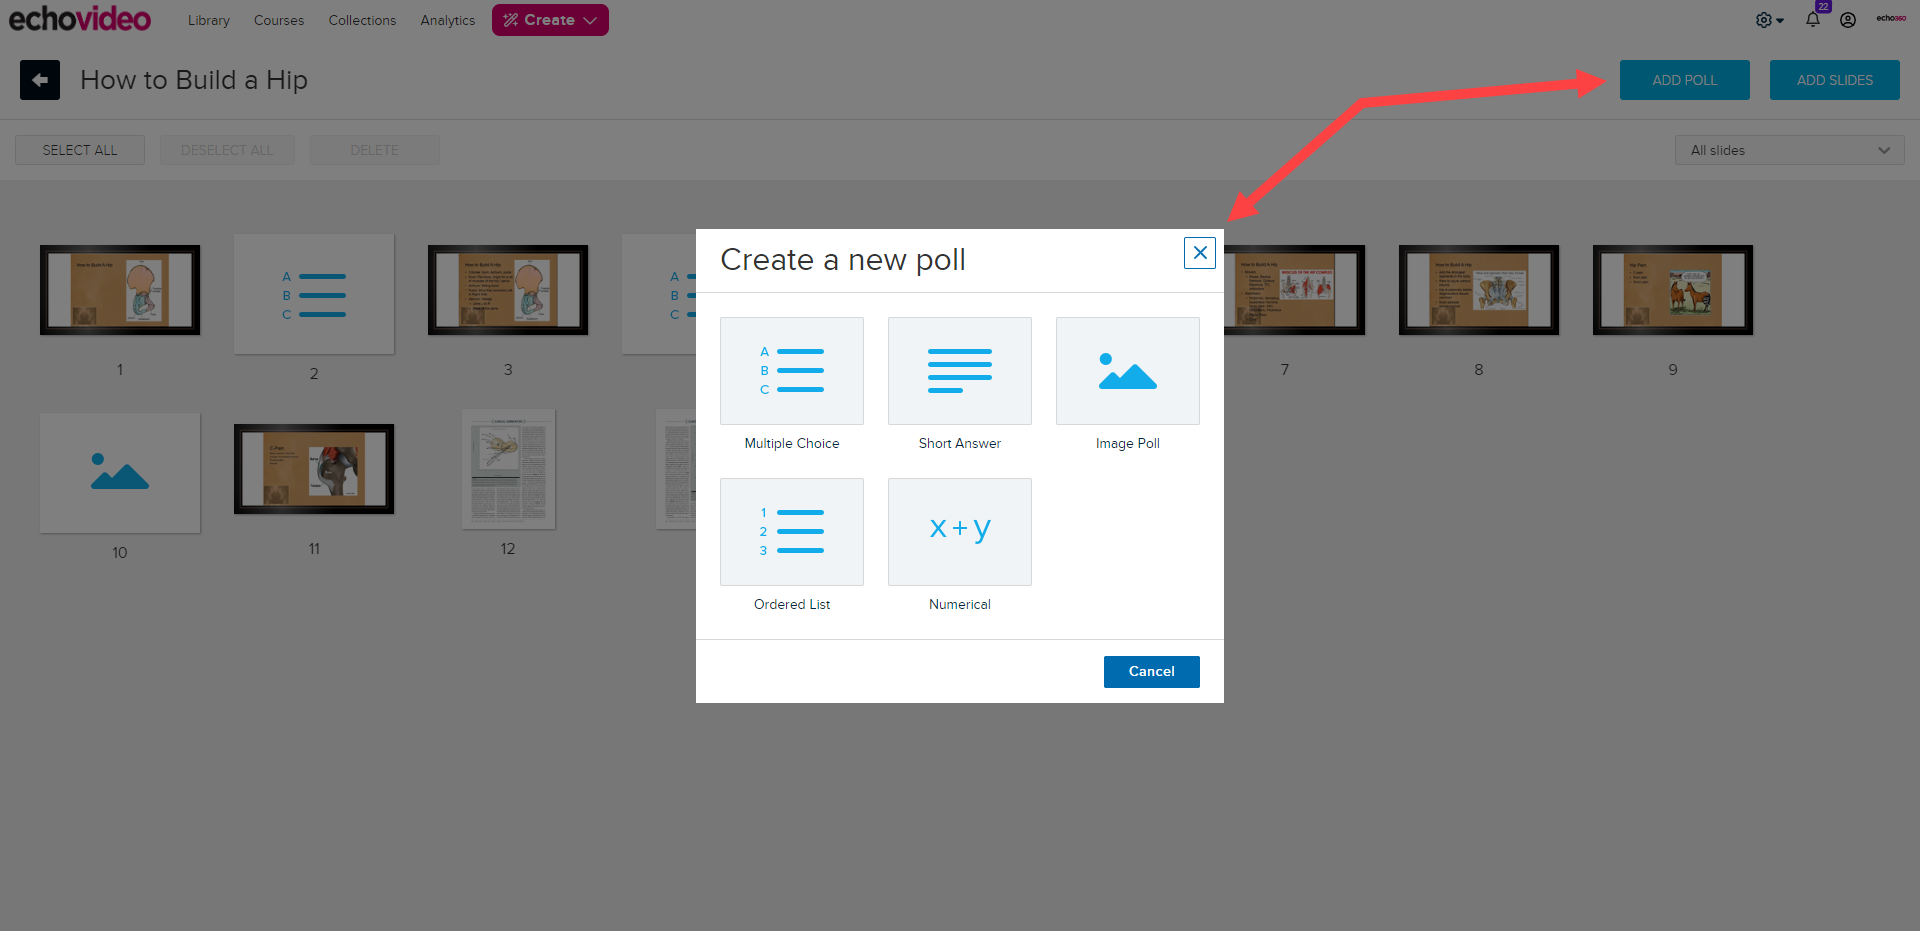 The Presentation Editor is shown with the Add Poll button identified and the create a new poll window with the five poll options and Cancel button displayed. Poll options are Multiple Choice, Short Answer, Image Poll, Ordered List, and Numerical